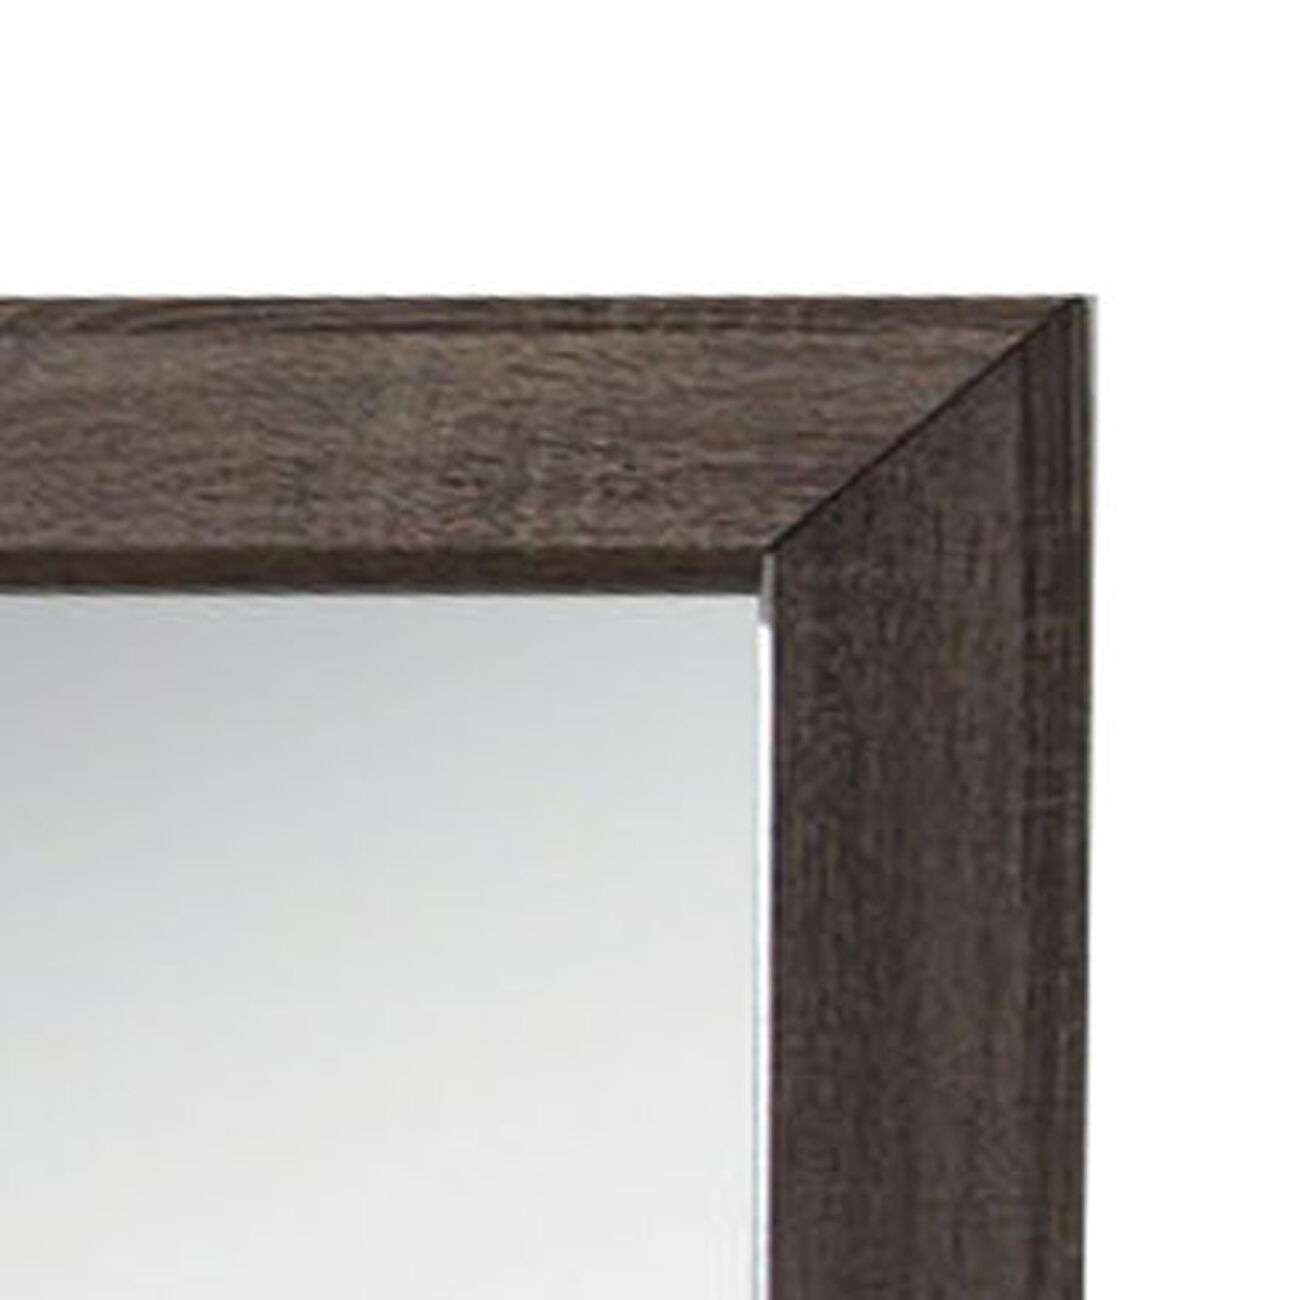 Wooden Clean Lines Framed Mirror with Rectangular Shape,Weathered Gray